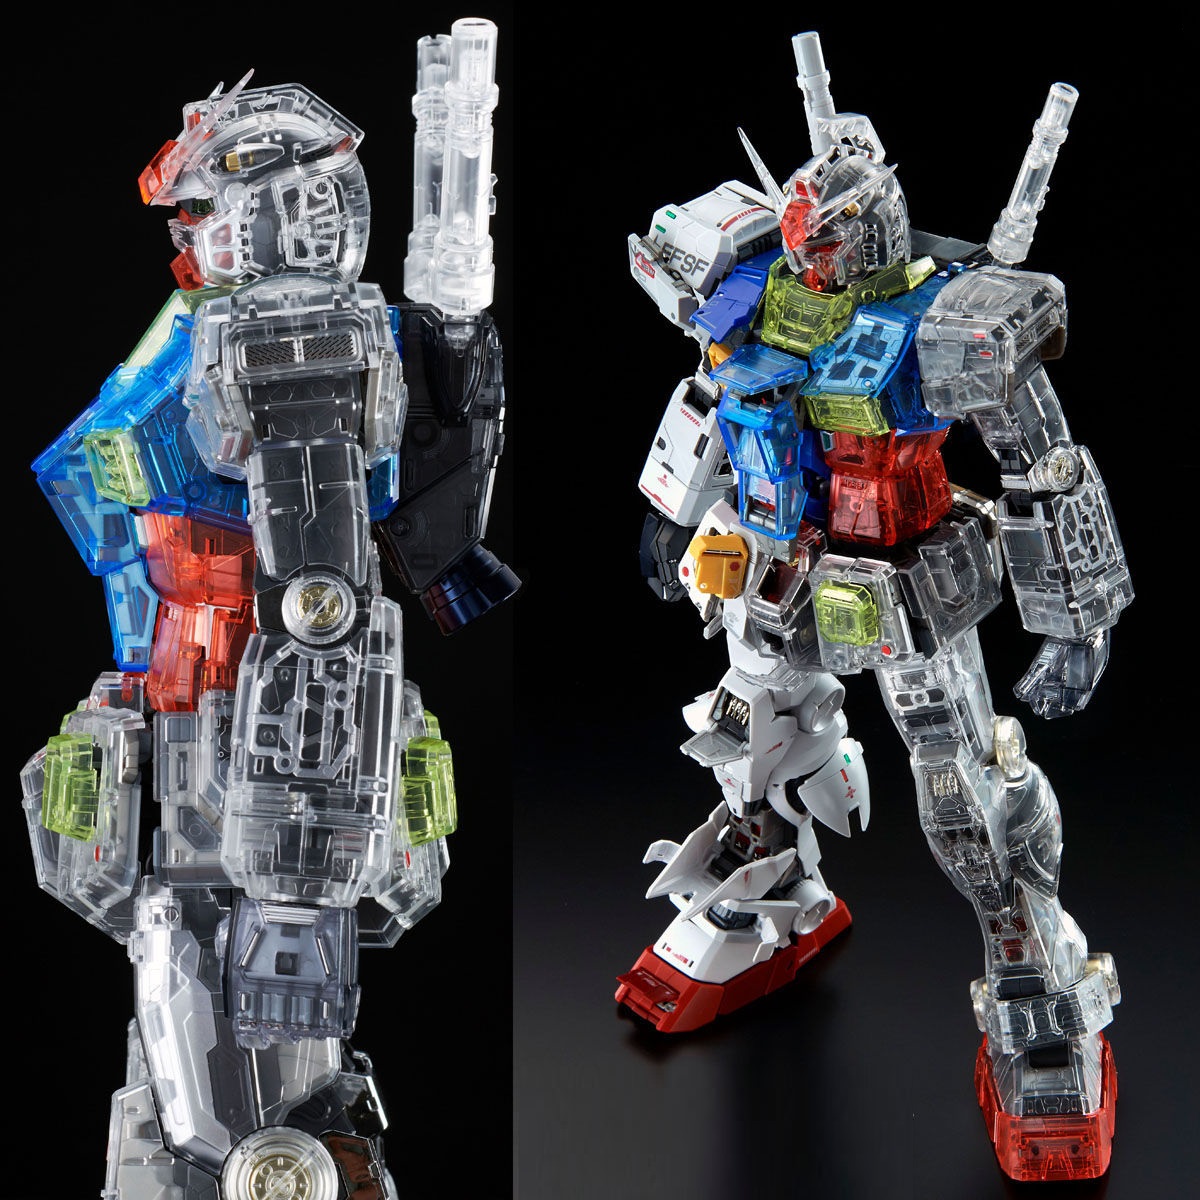 Pg Unleashed 1 60 Clear Color Body For Rx 78 2 Gundam Jun 21 Delivery Gundam Premium Bandai Singapore Online Store For Action Figures Model Kits Toys And More